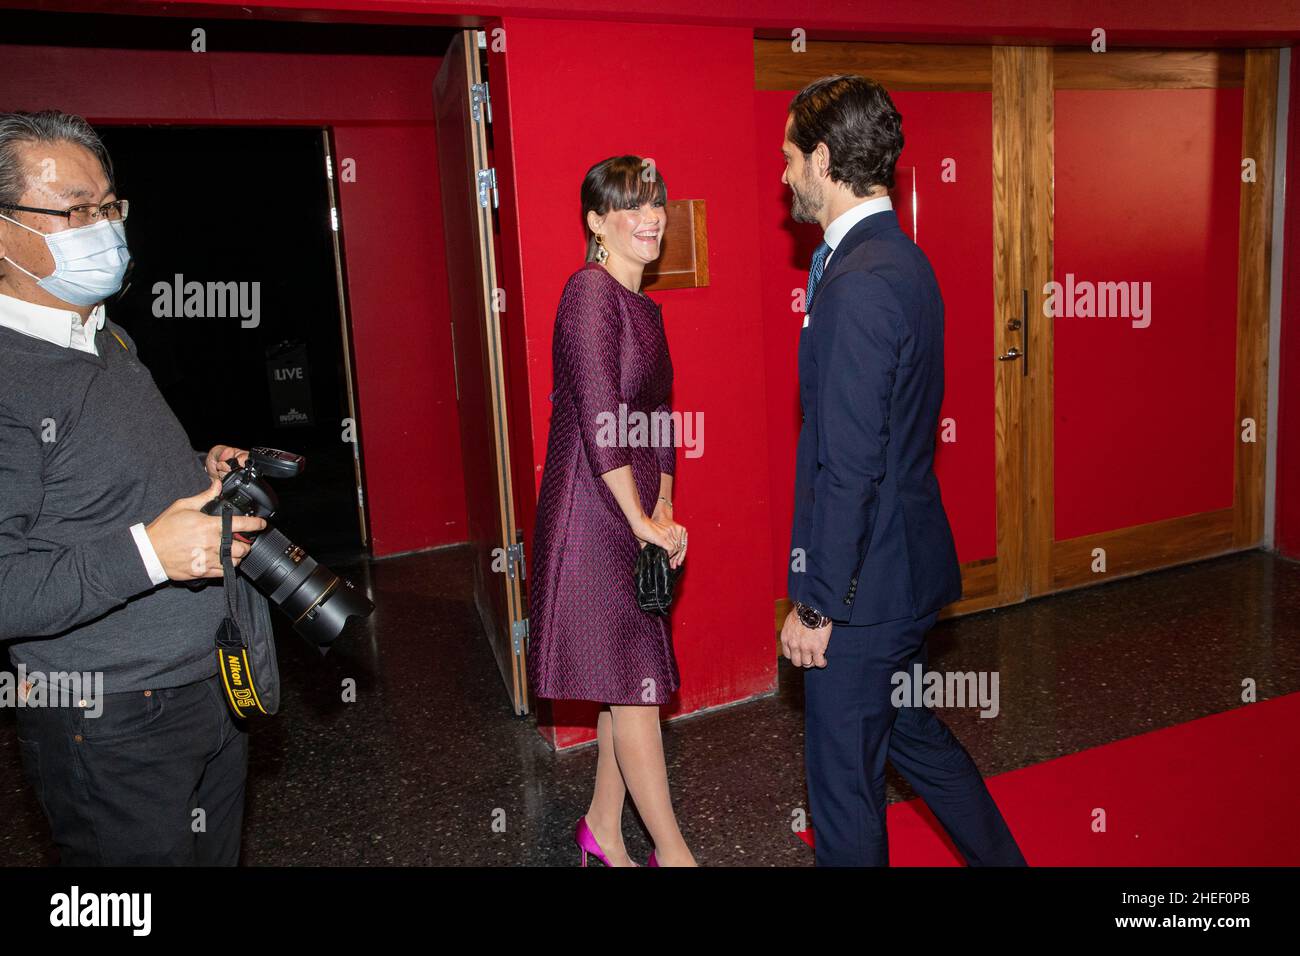 Princess Sofia and Prince Carl Philip arrive to the the performance "Celebrate democracy - 100 years" at Annexet in Stockholm Sweden January 10, 2022. Stock Photo